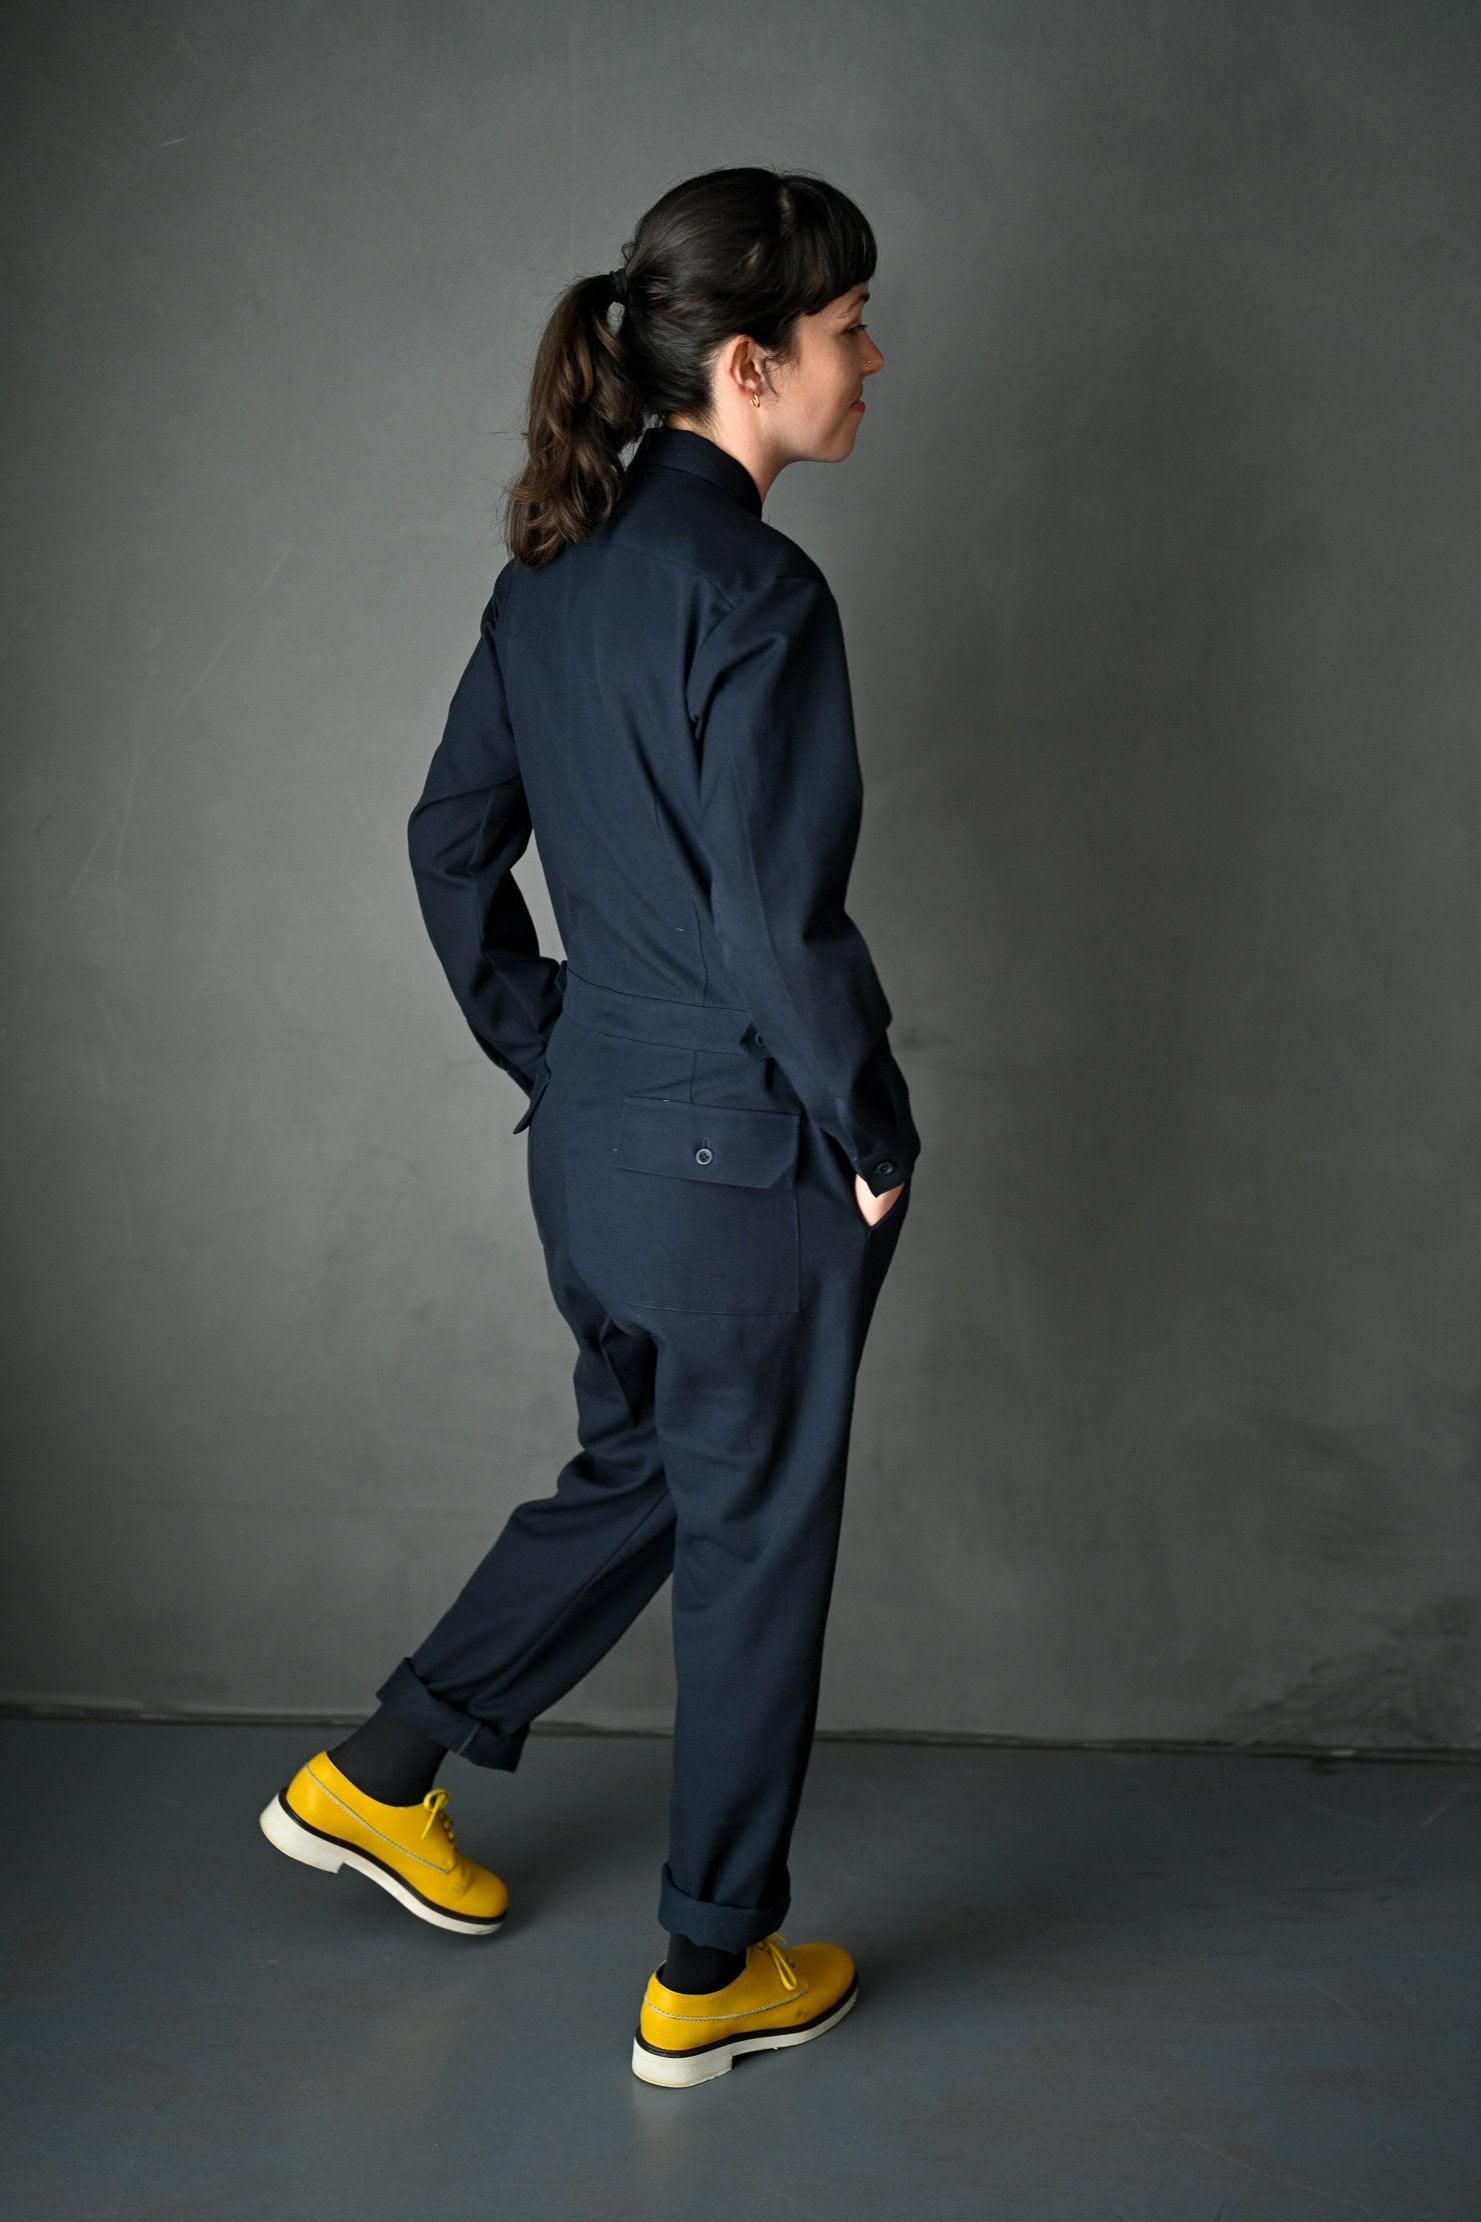 Woman wearing the Thelma Boilersuit sewing pattern by Merchant and Mills. A boilersuit pattern made in twill, denim, cotton poplin or linen fabric featuring a loose fit, back pockets, breast pockets, collard neck, front zip and long sleeves.